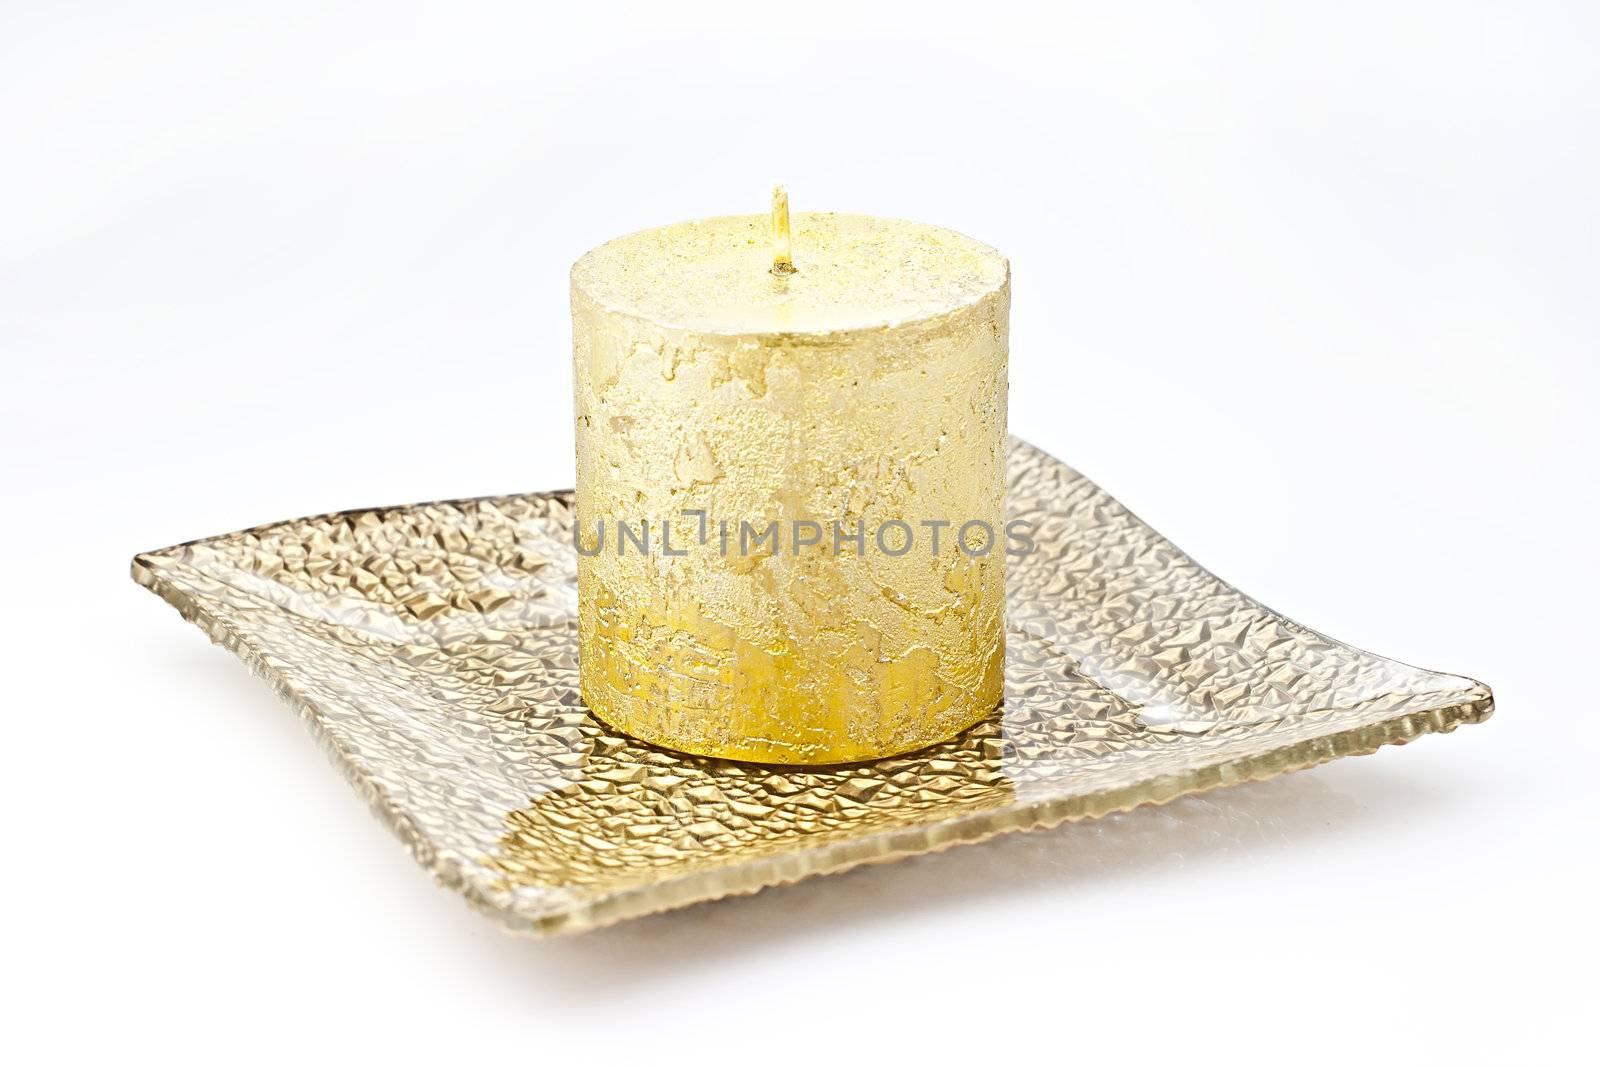 Isolated on white background gold candle in a glass dish.
